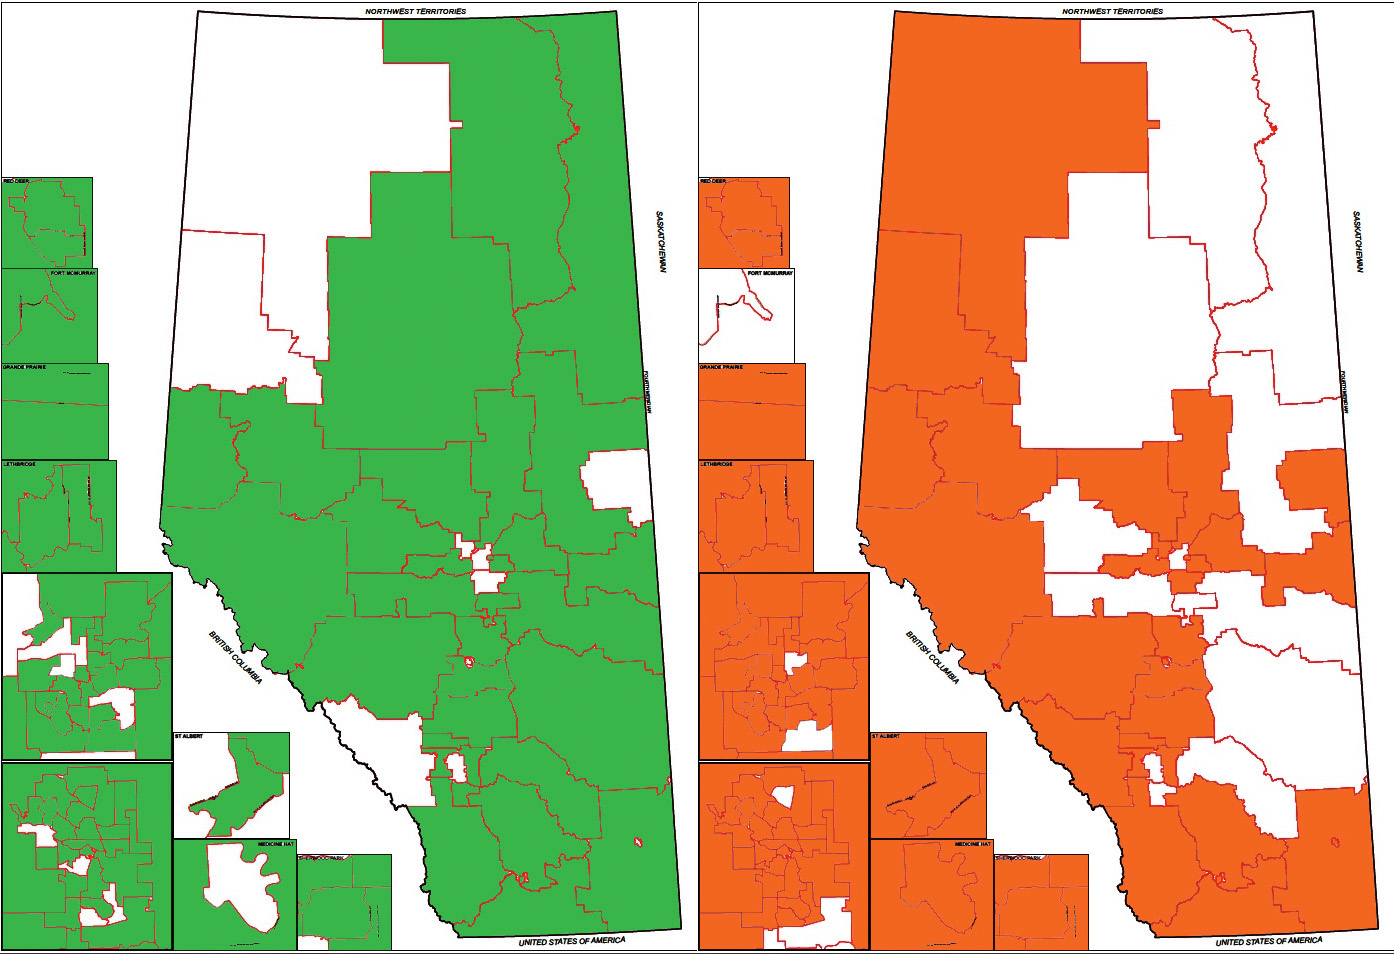 Map of constituencies with nominated Wildrose and Alberta NDP candidates (January 17, 2012)